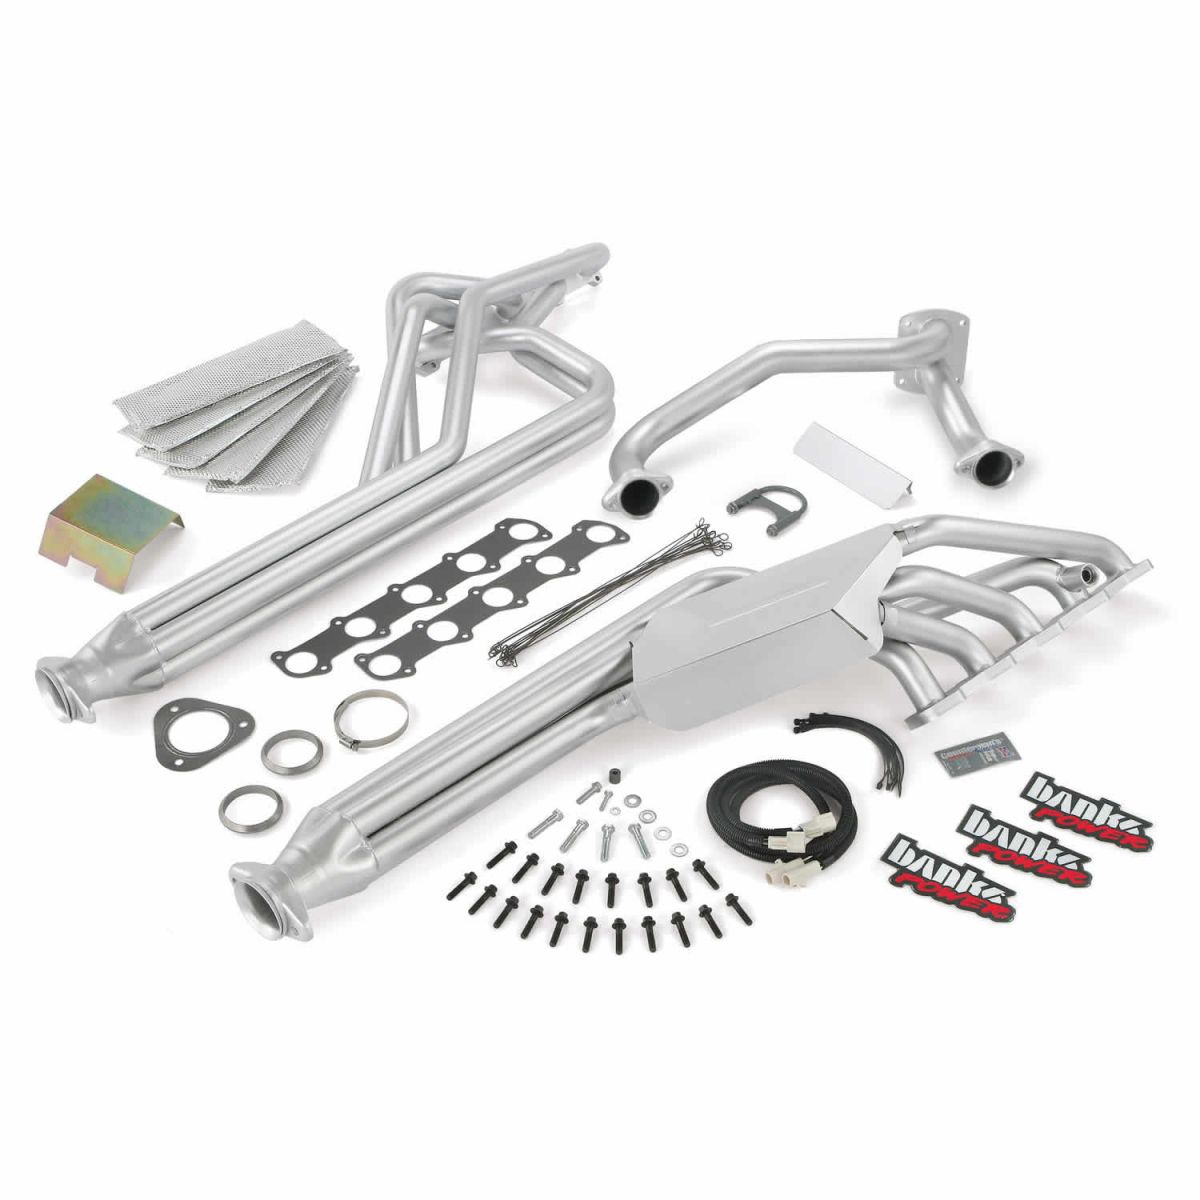 Banks Power - Banks Power Torque Tube Exhaust Header System 06-10 Ford F-53 6.8L V-10 Class-A Motorhome